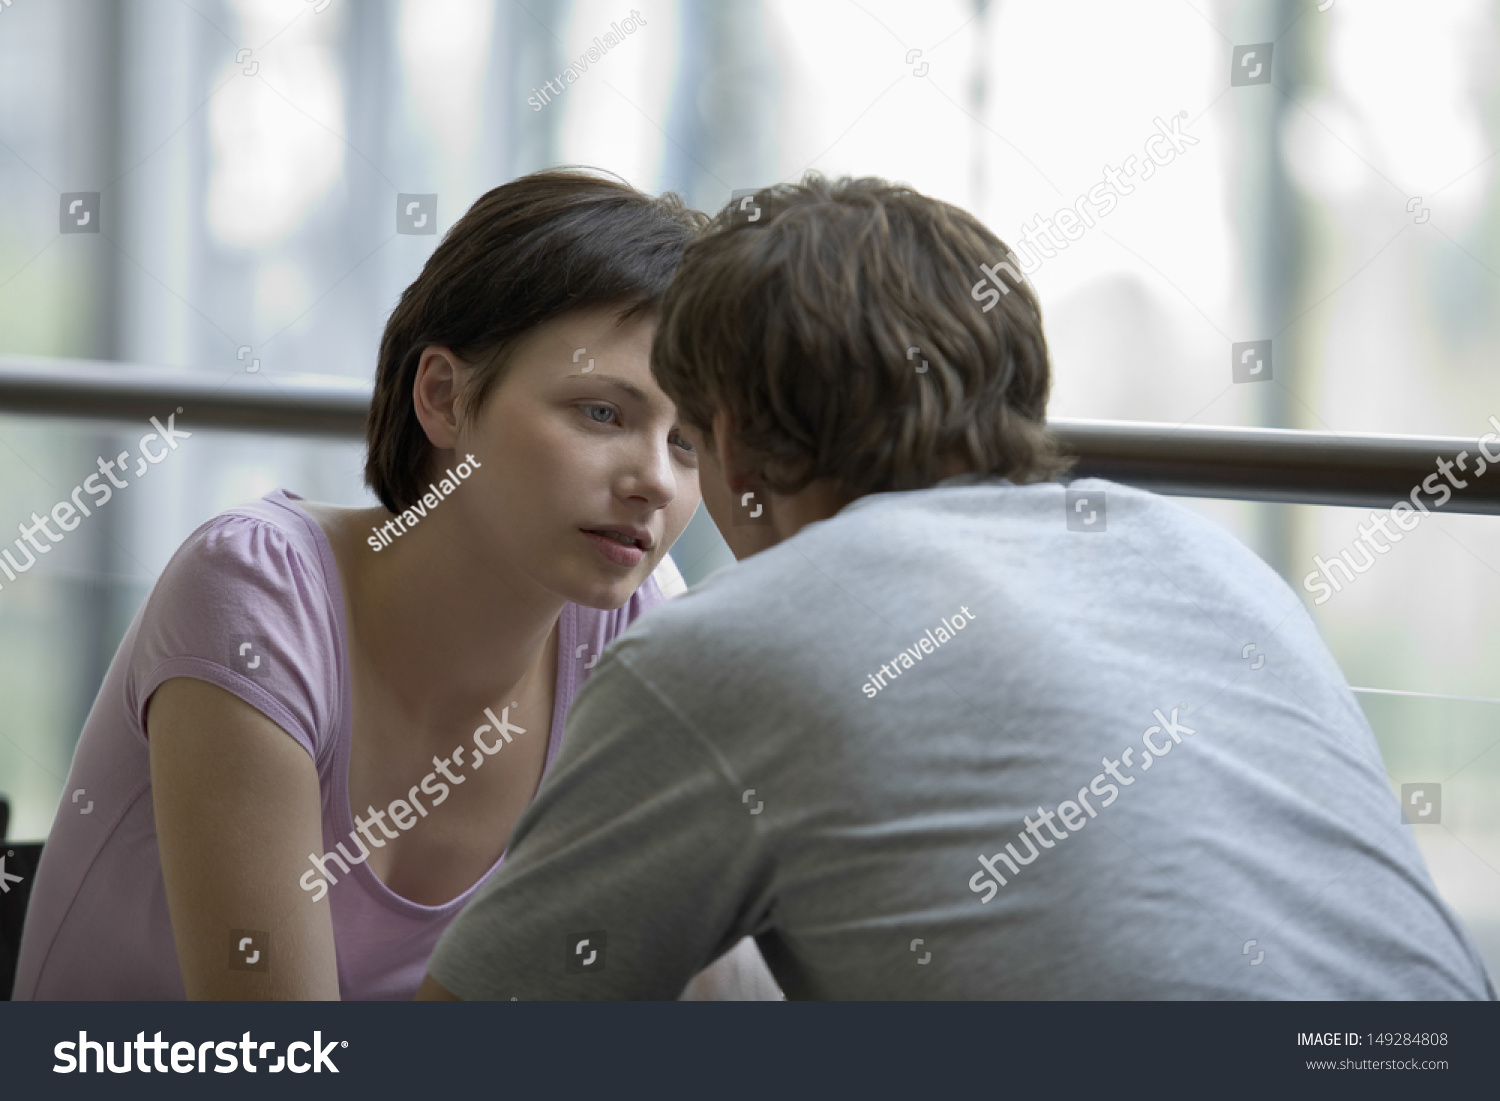 Young woman with man sitting in cafe of shopping center #149284808